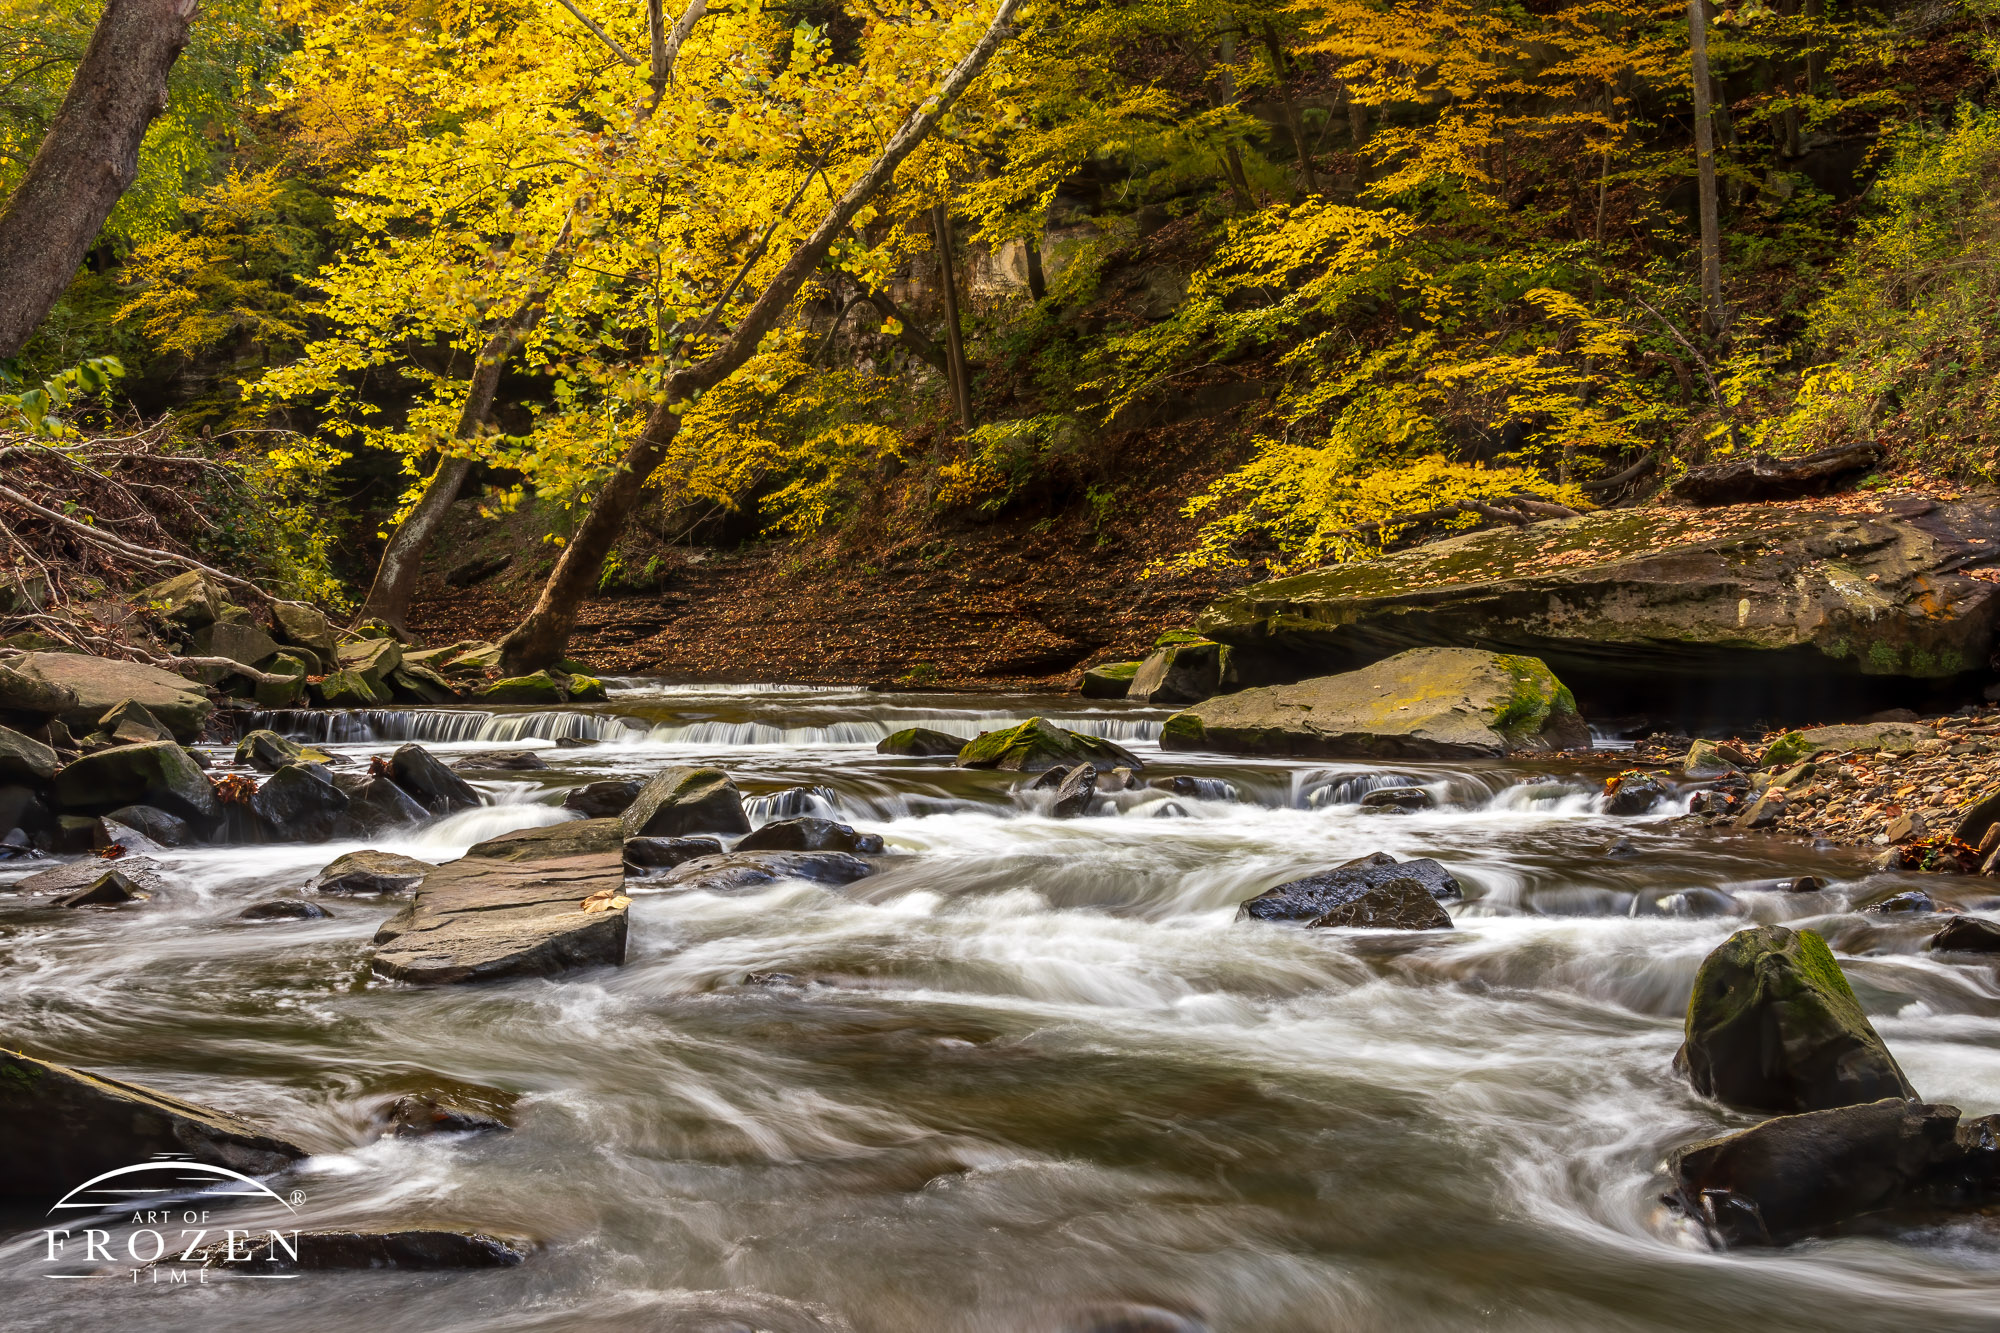 As Trinker's Creek flows through its gorge, the water flows over a series of small waterfalls as the water swirls around large boulders on a fall day